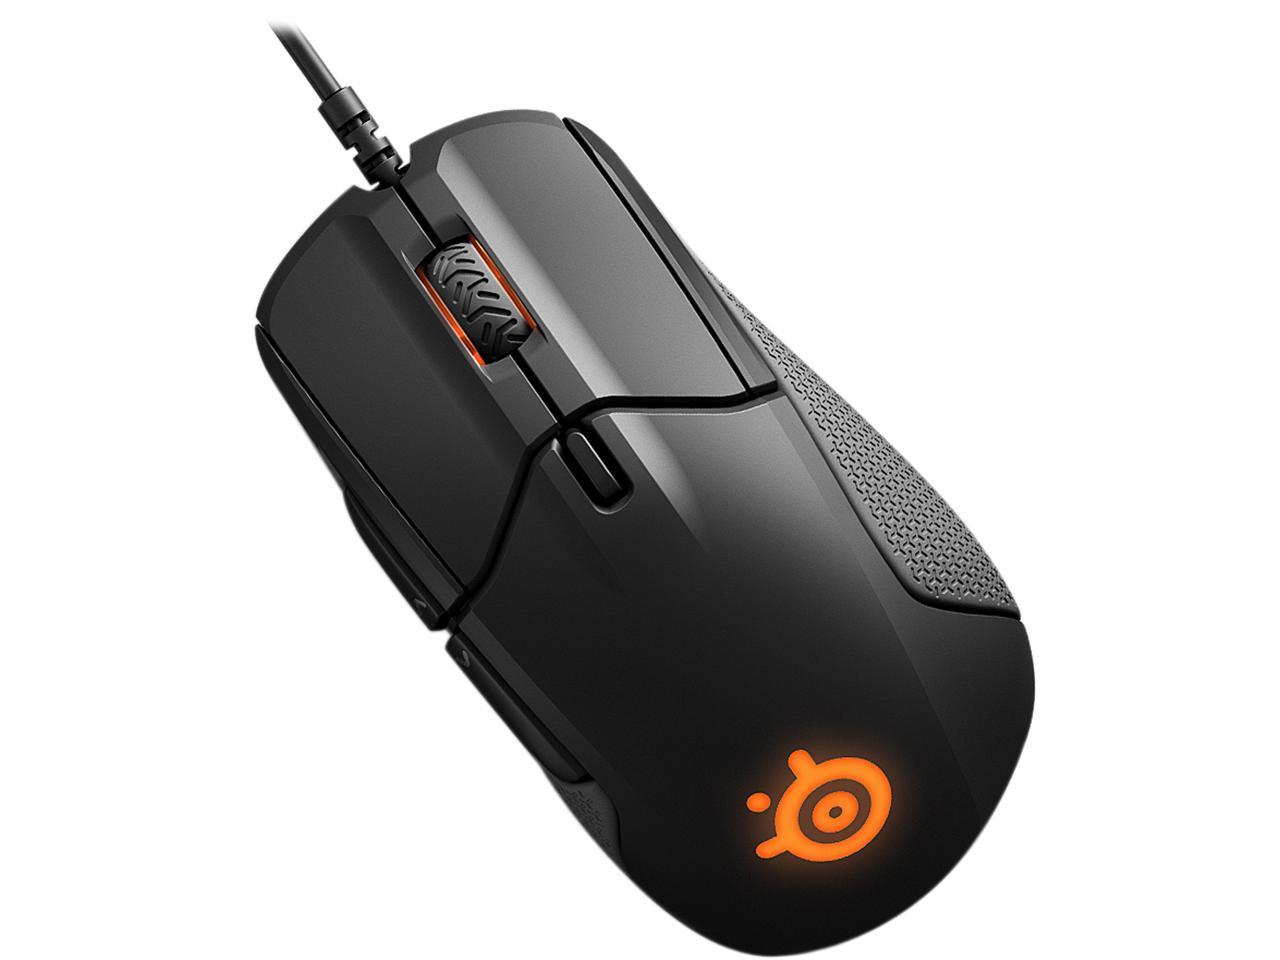 Detail Steelseries Sims 4 Mouse Nomer 48